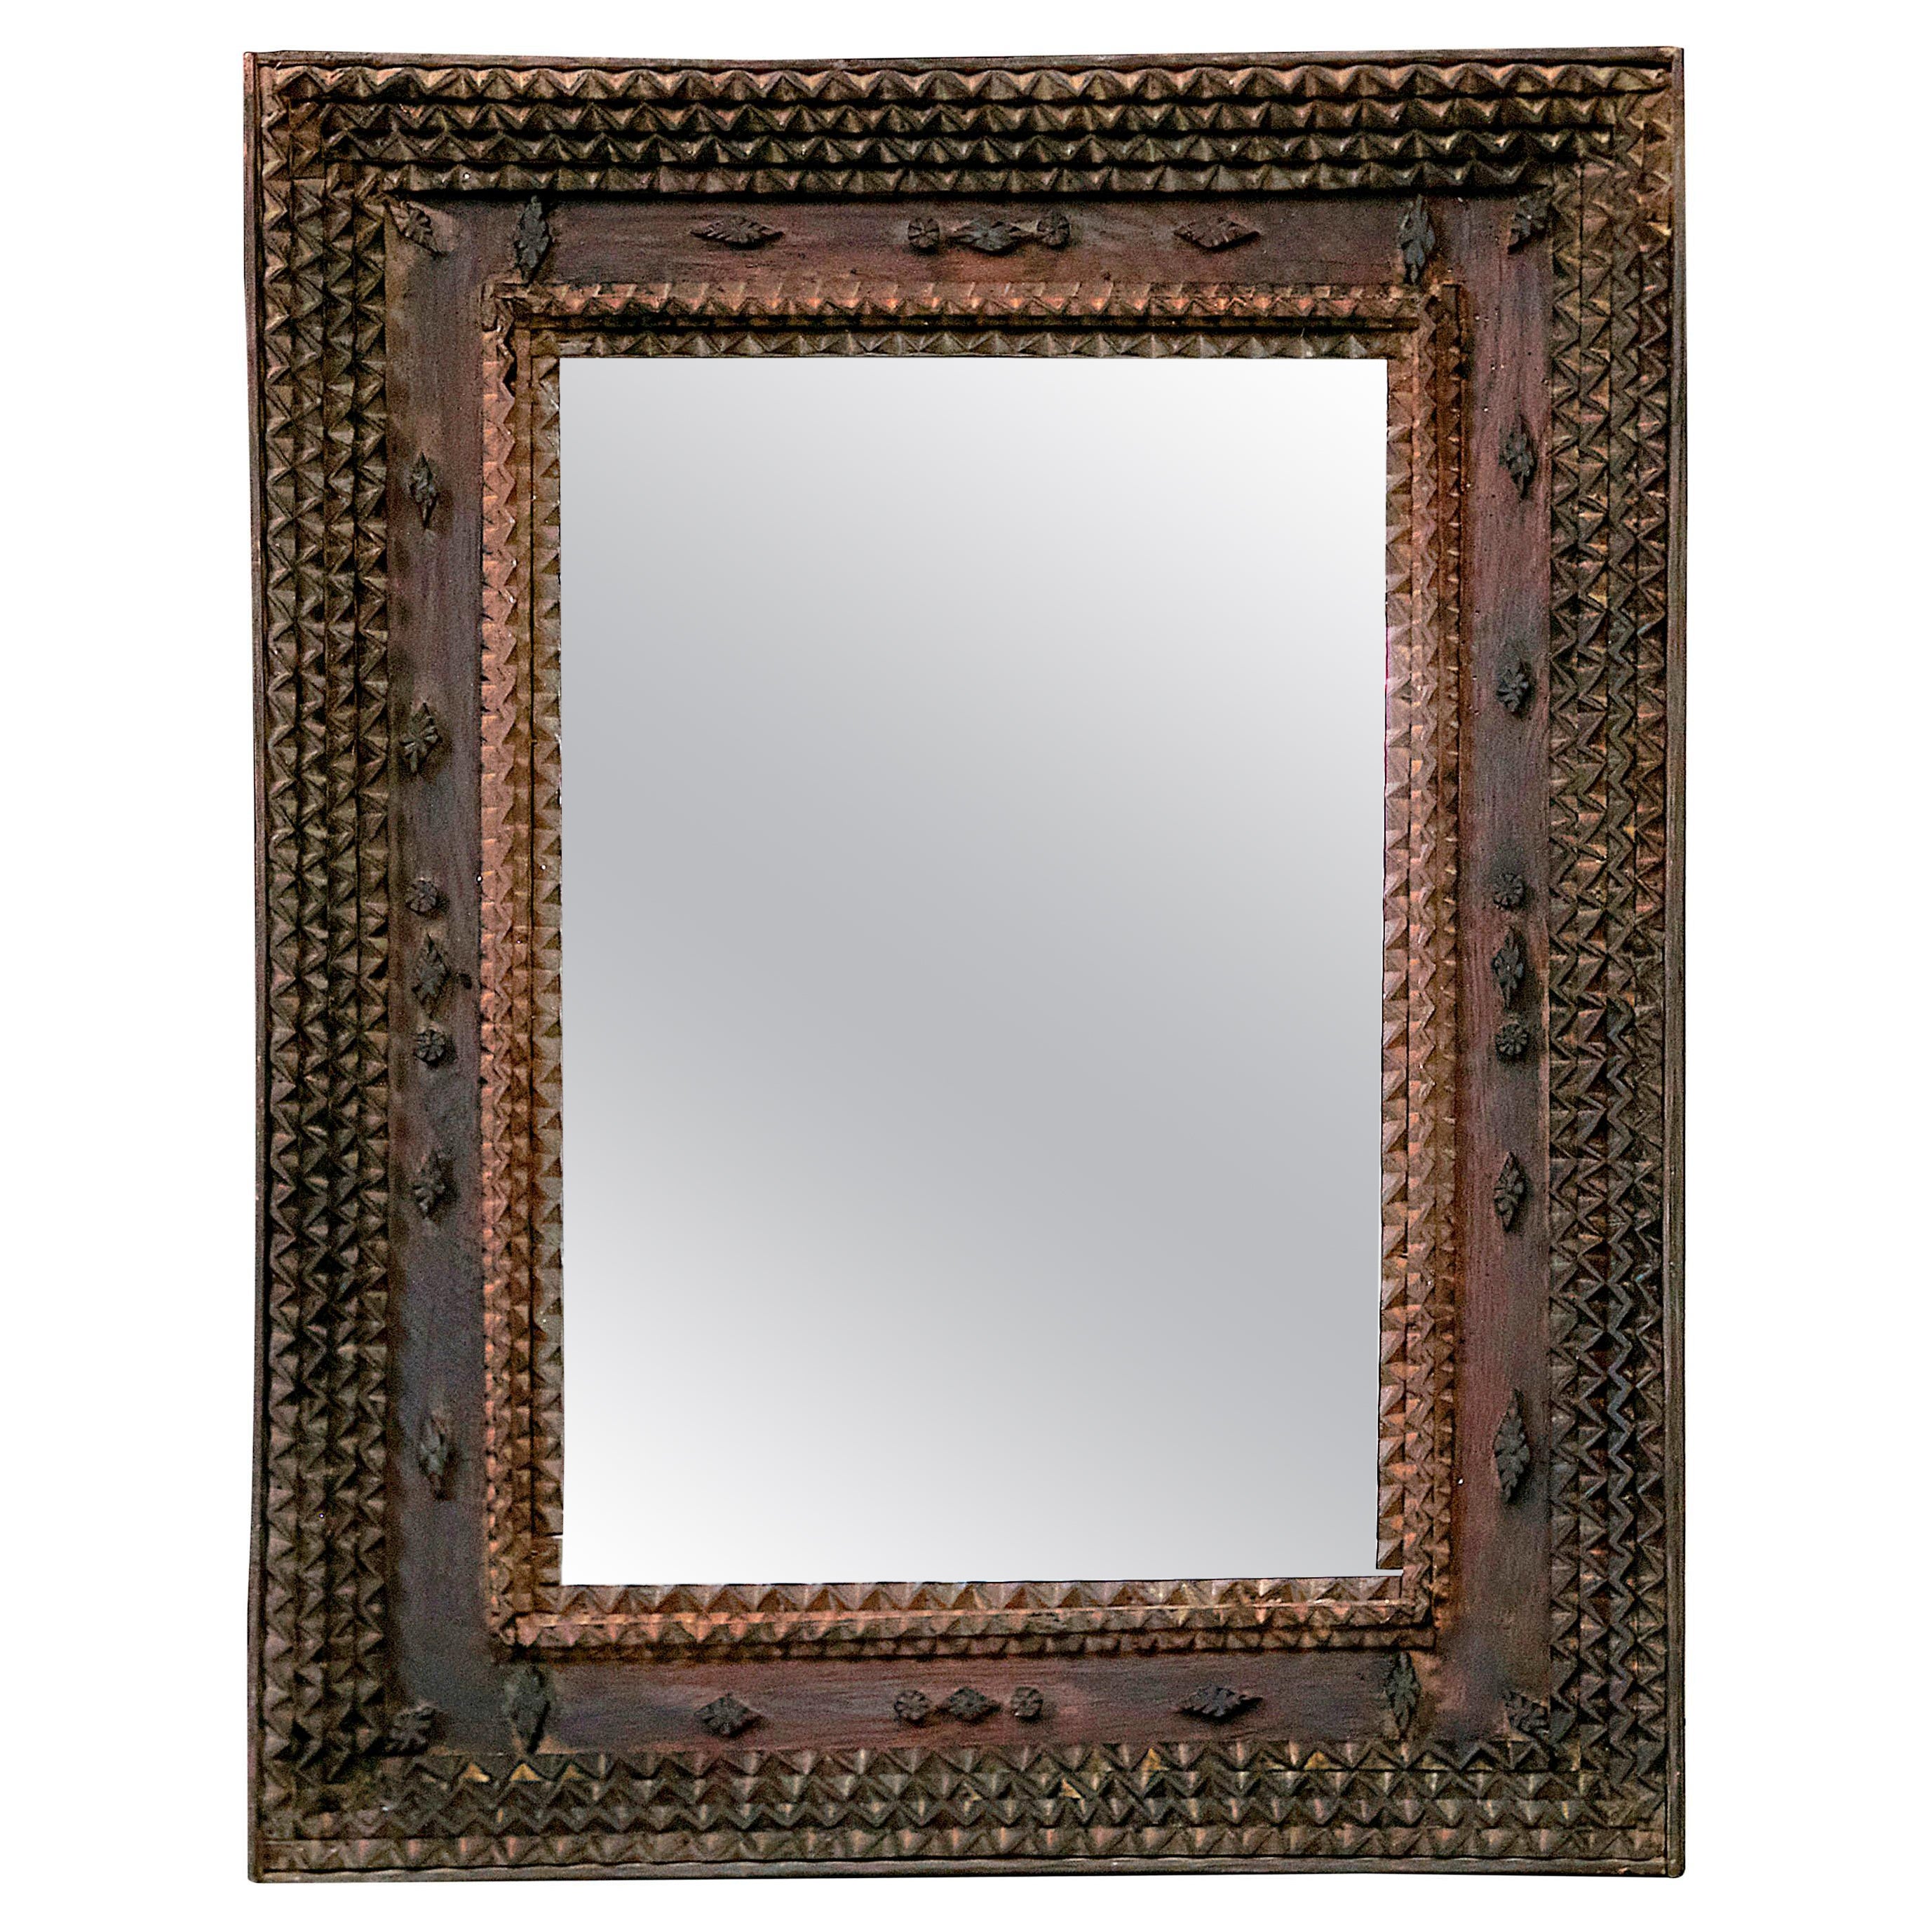 French Turn of the Century Tramp Art Wall Mirror with Brown Patina, circa 1900